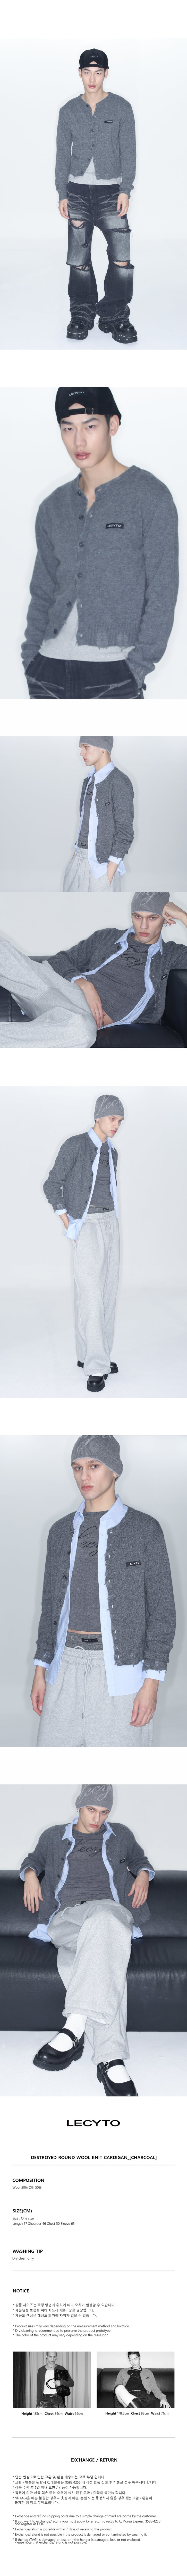 Destroyed Round Wool Knit Cardigan_(Charcoal)